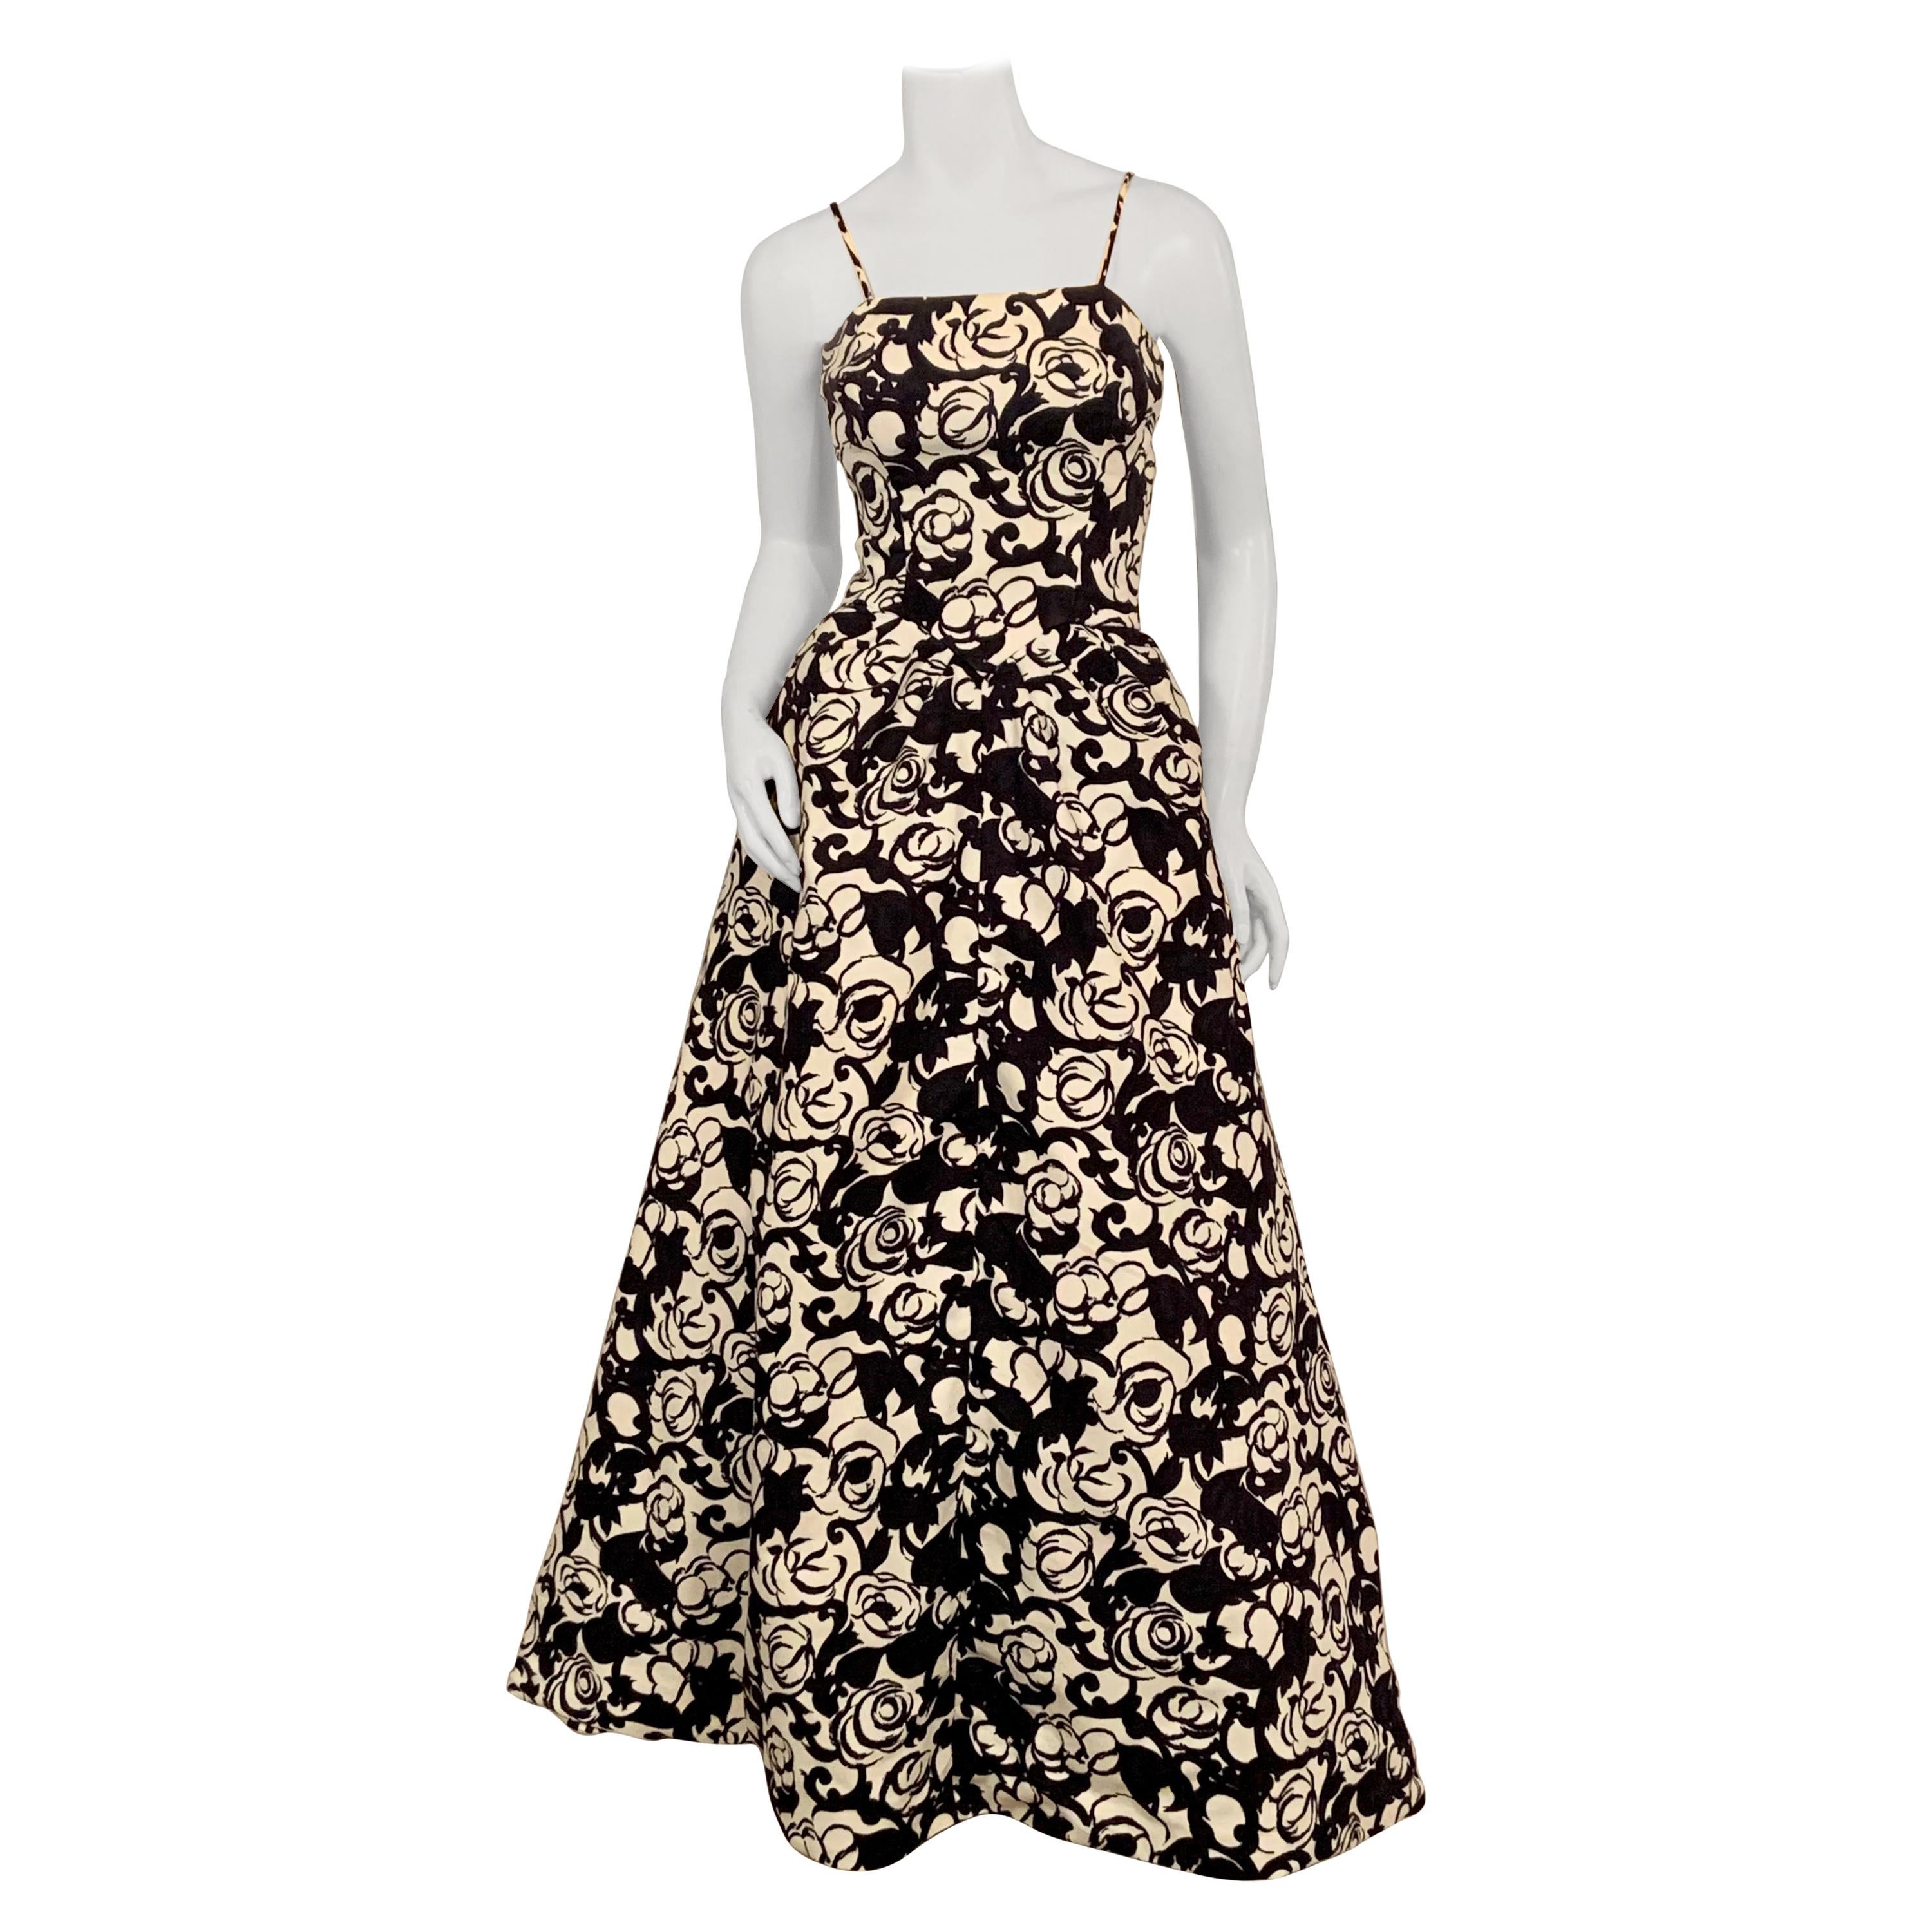 Striking Black and White Floral Print Cotton Pique Evening Gown by Will Steinman